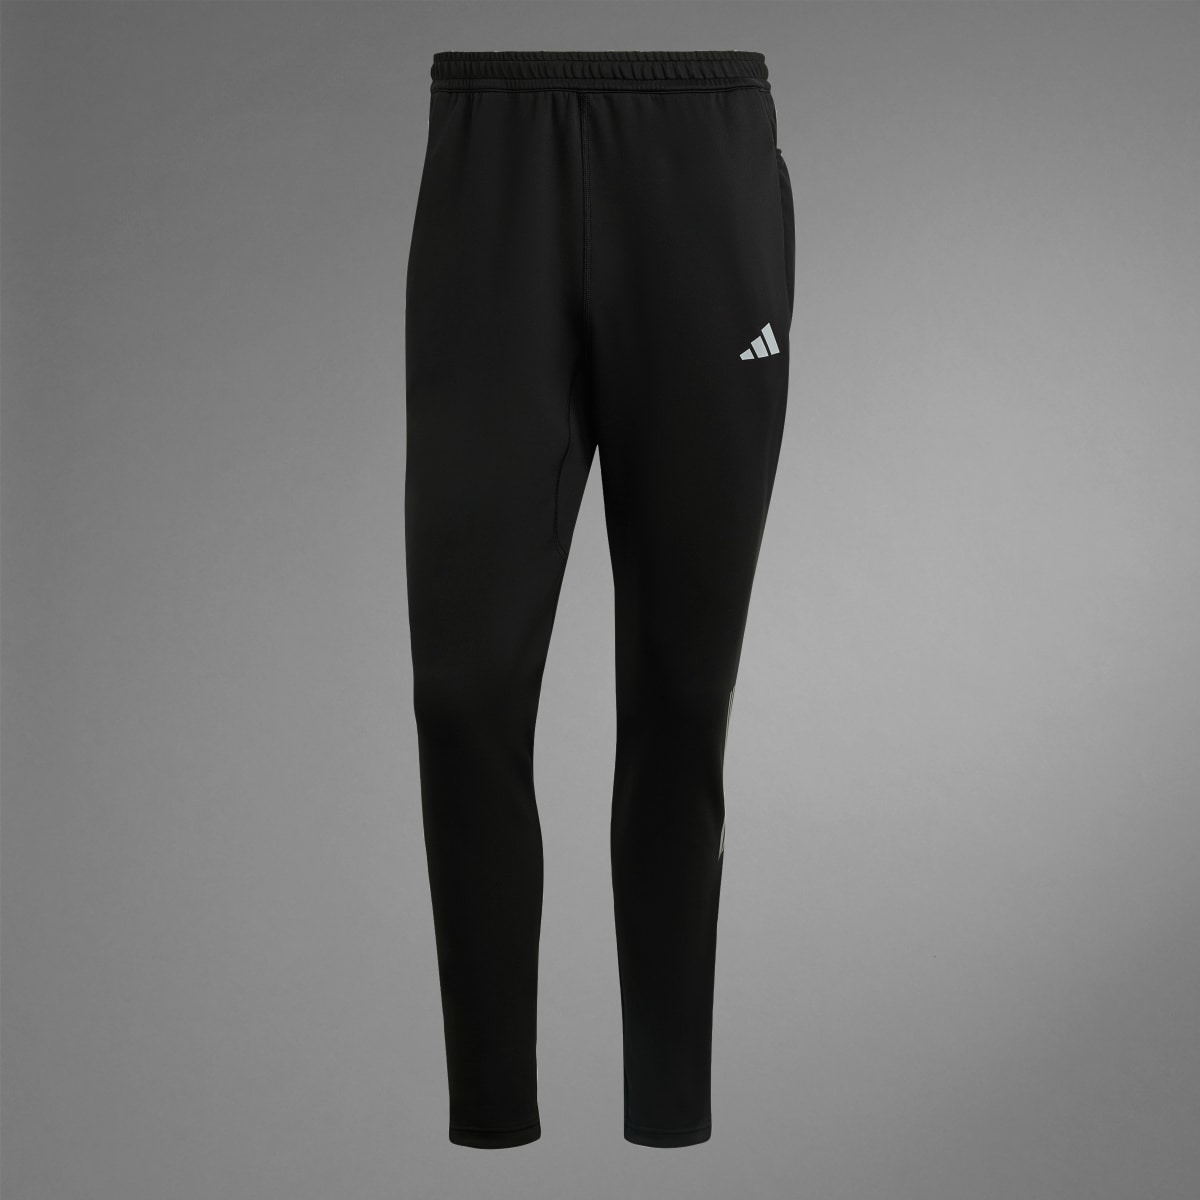 Adidas Own the Run Astro Knit Pants. 9